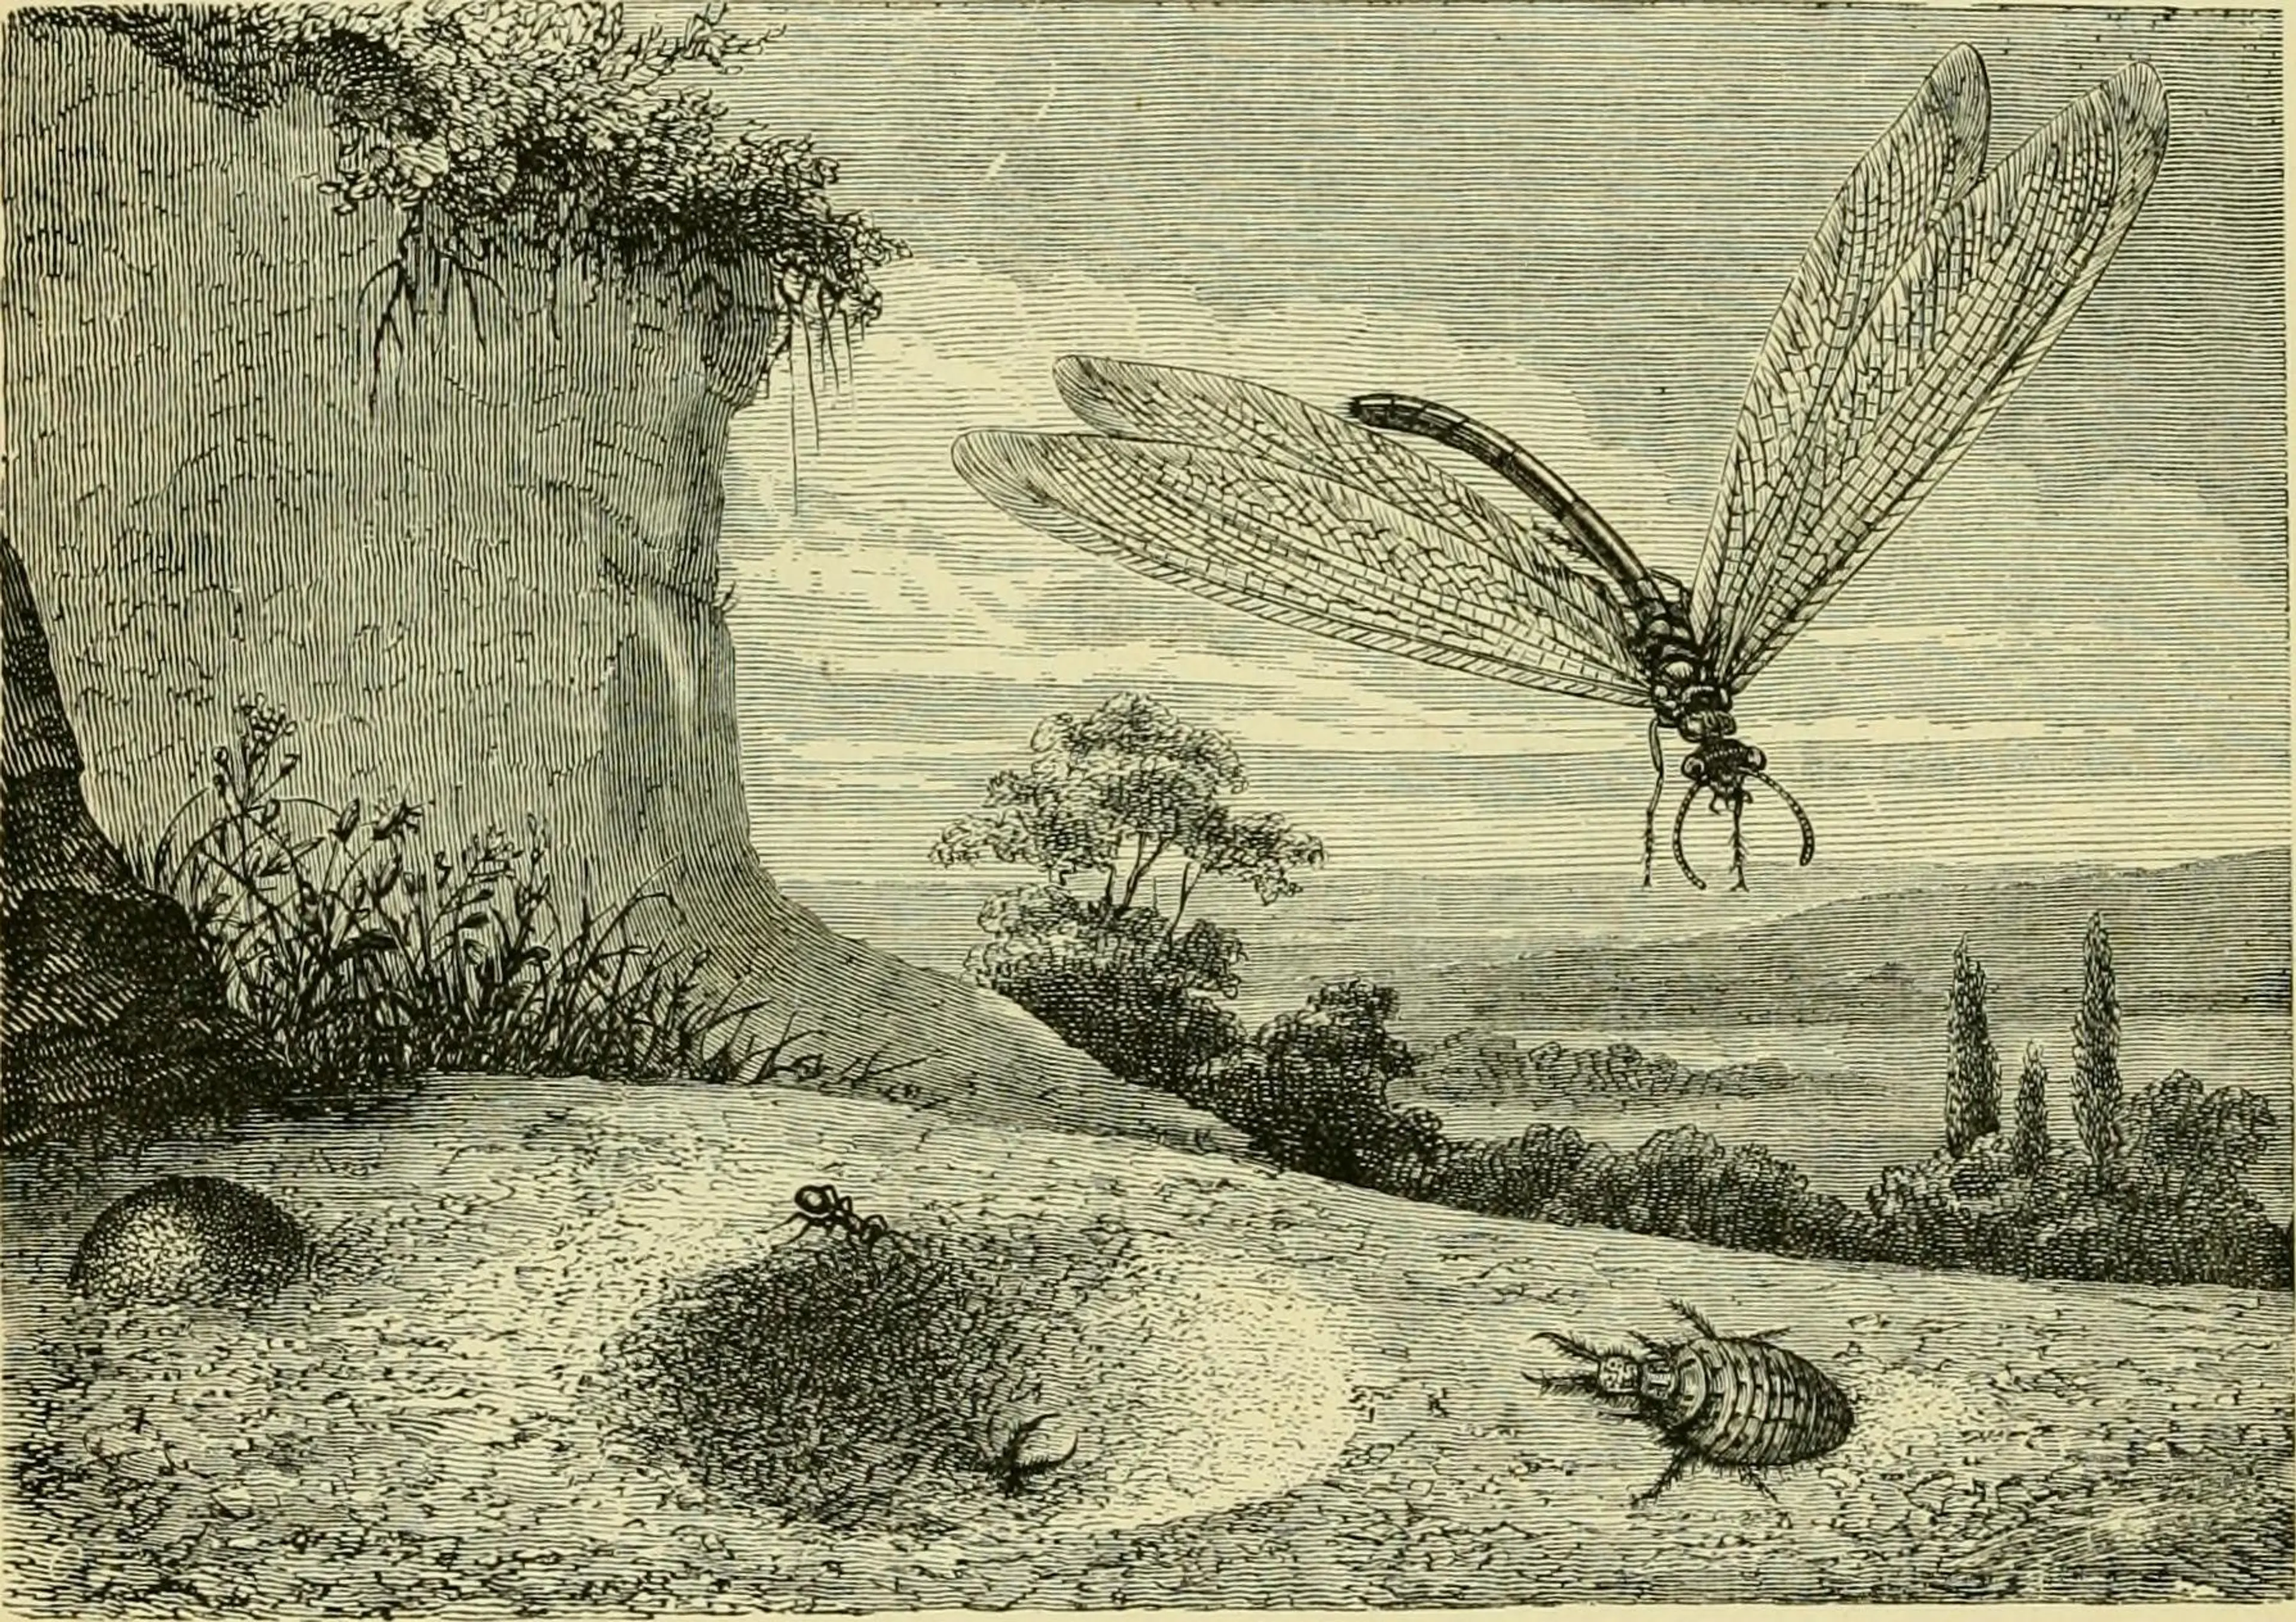 File: The transformations (or metamorphoses) of insects (Insecta, Myriapoda, Arachnida, and Crustacea)